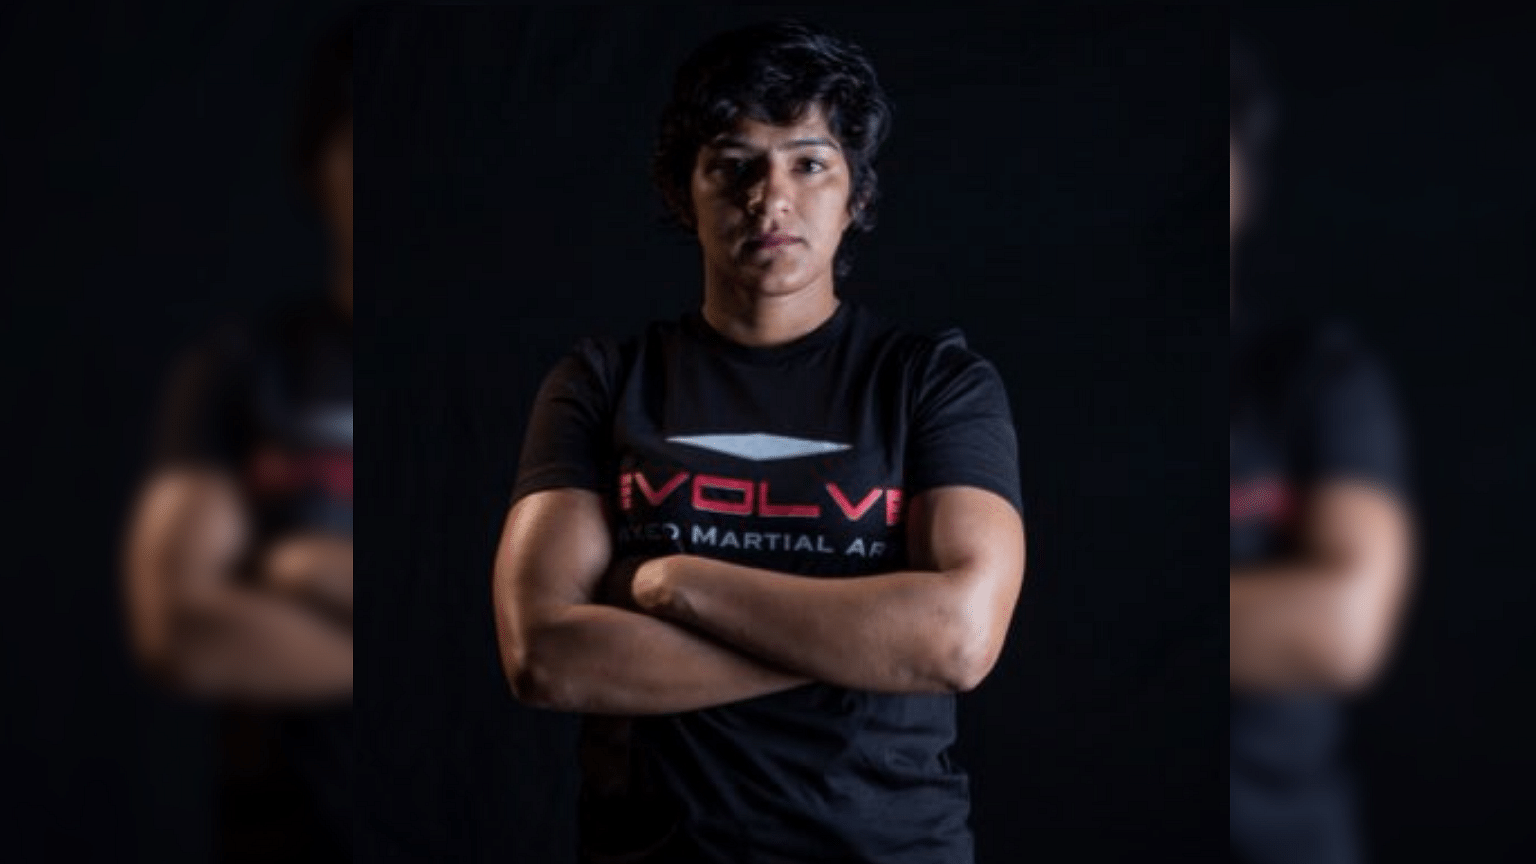 Ritu Phogat has decided to give up her wrestling career for one in Mixed Martial Arts.